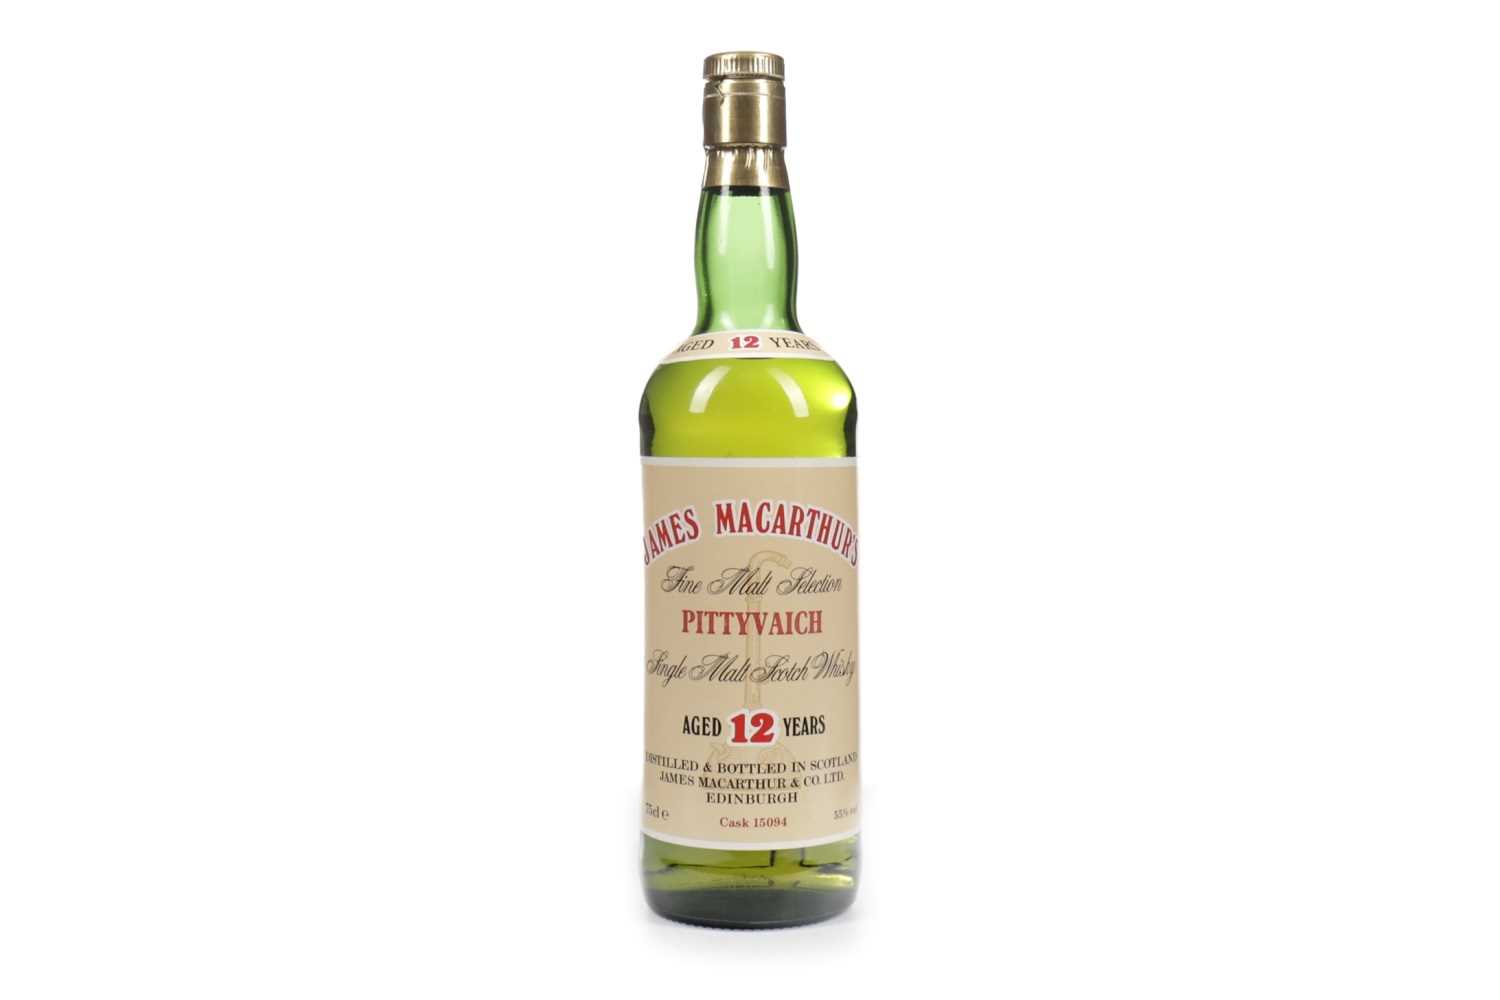 Lot 75 - PITTYVAICH JAMES MACARTHUR'S AGED 12 YEARS